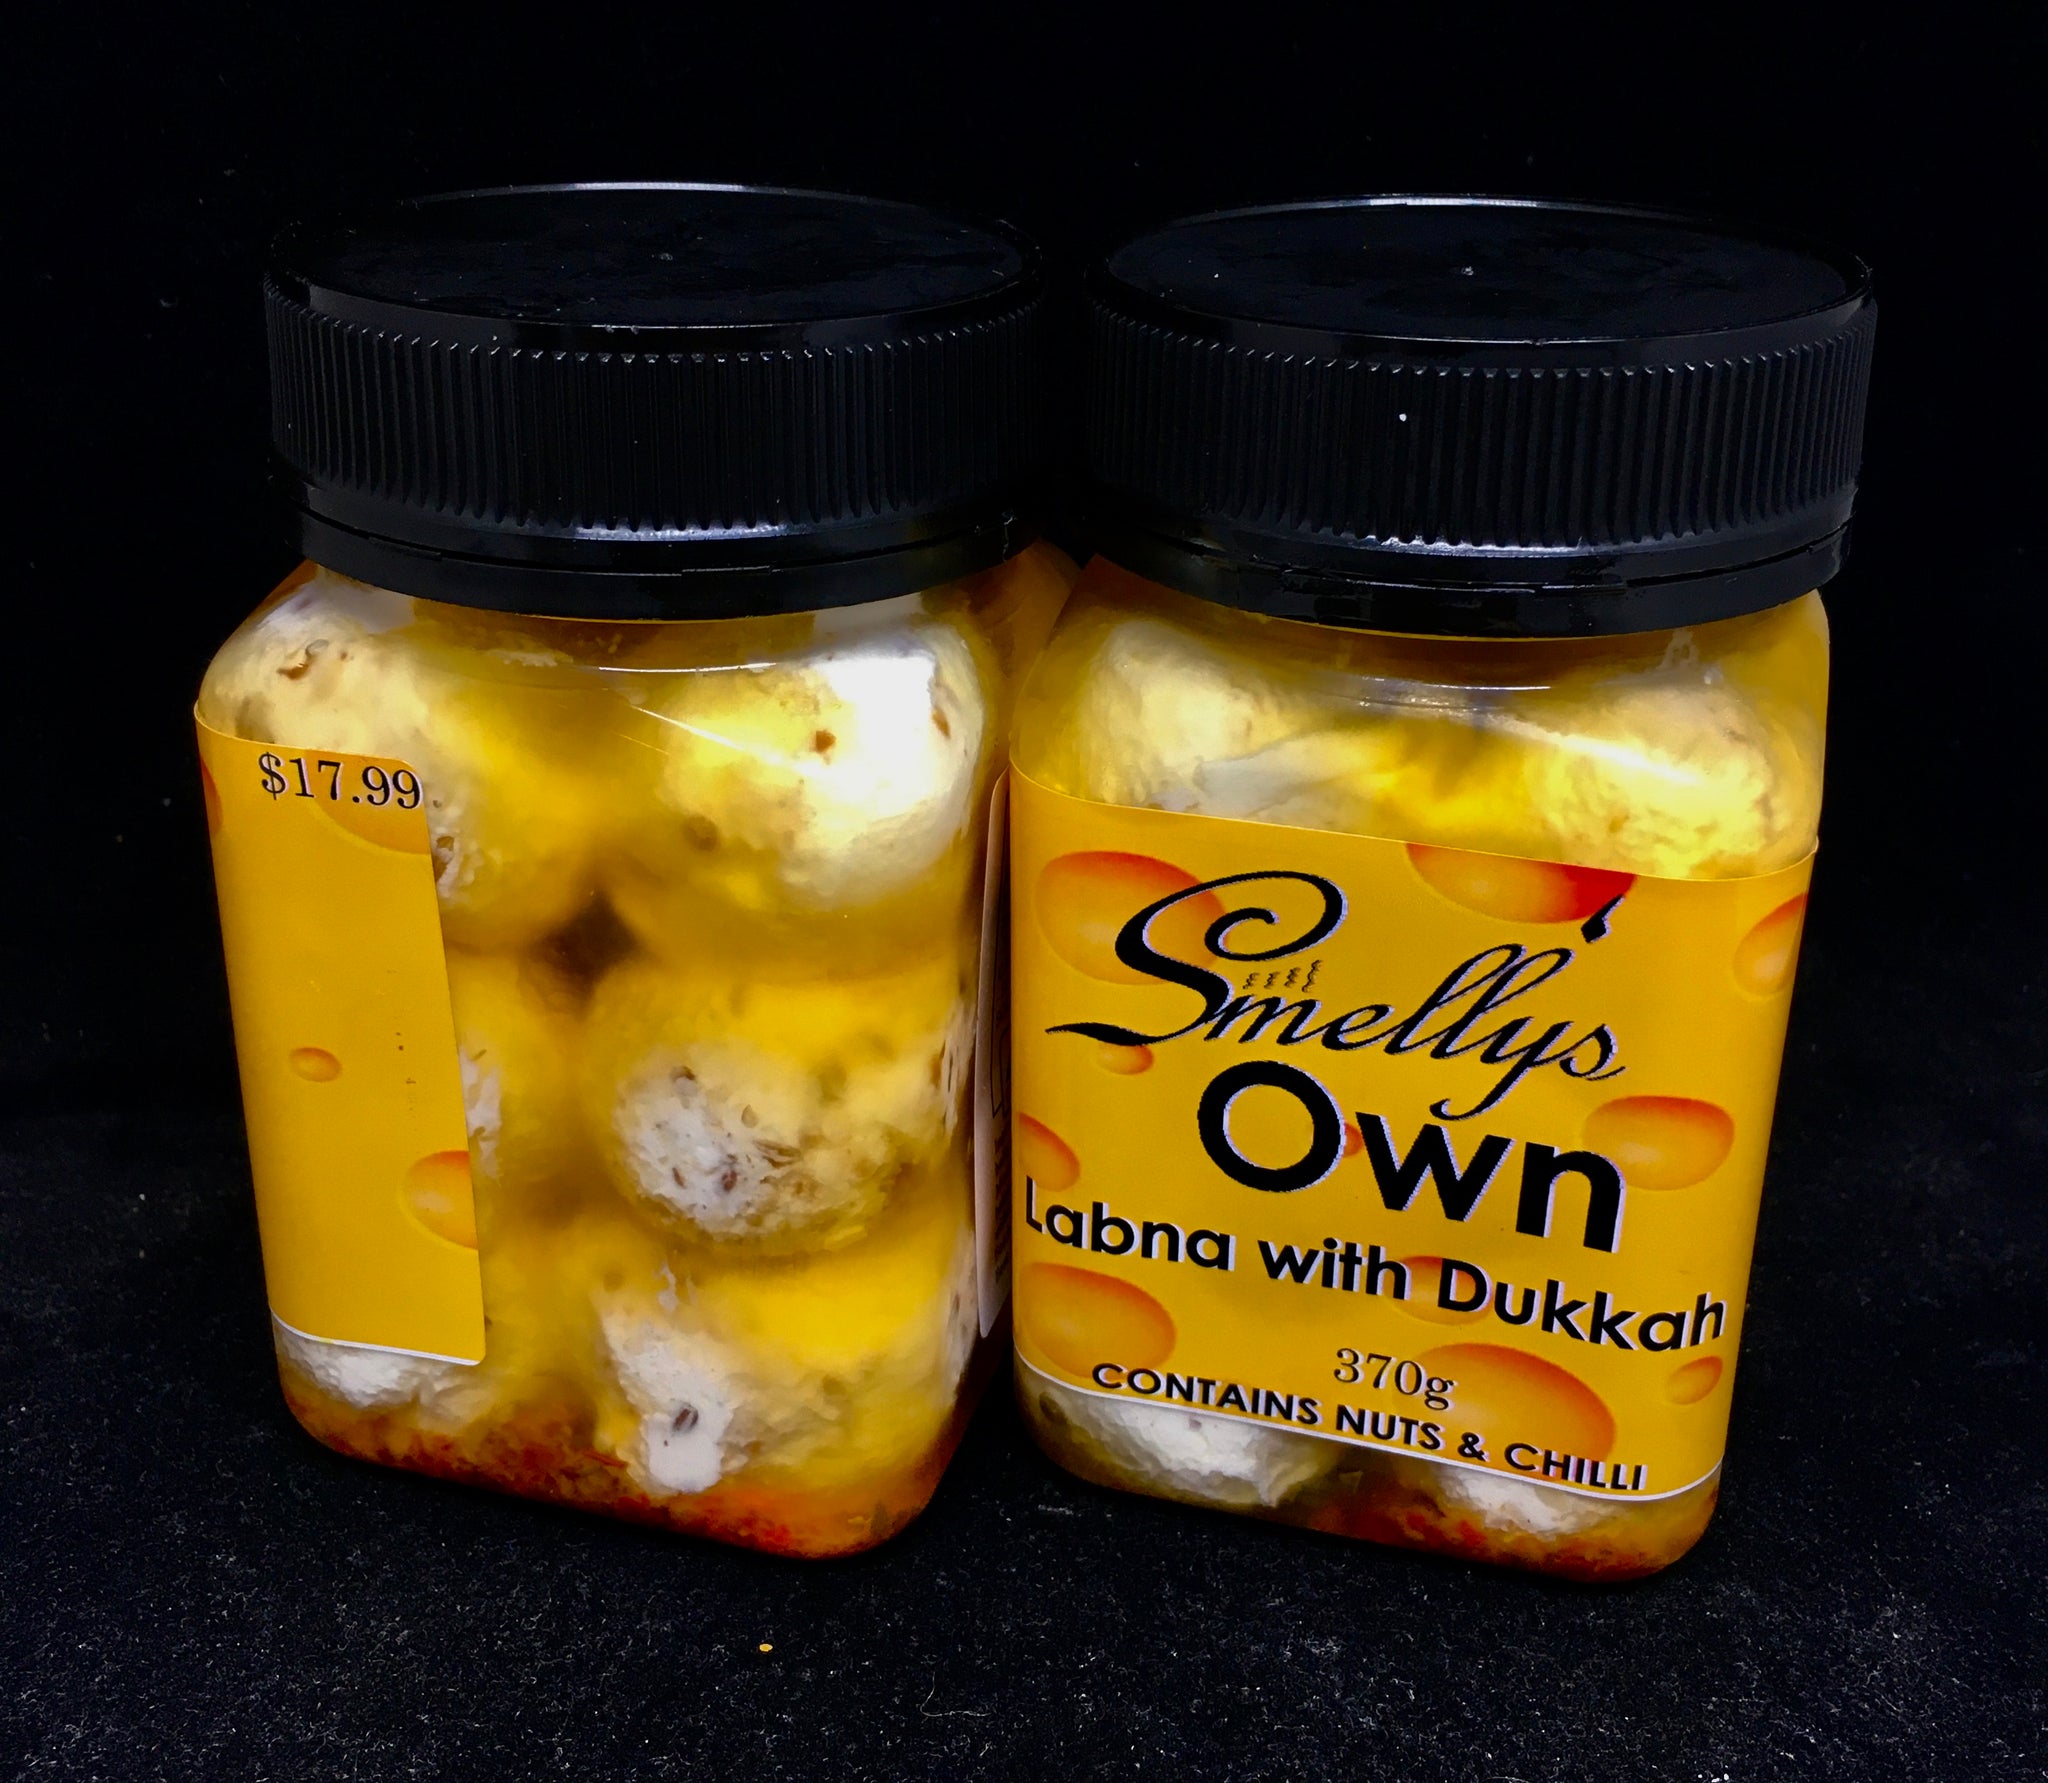 Smelly's Own - Labna with Dukkah - $17.99